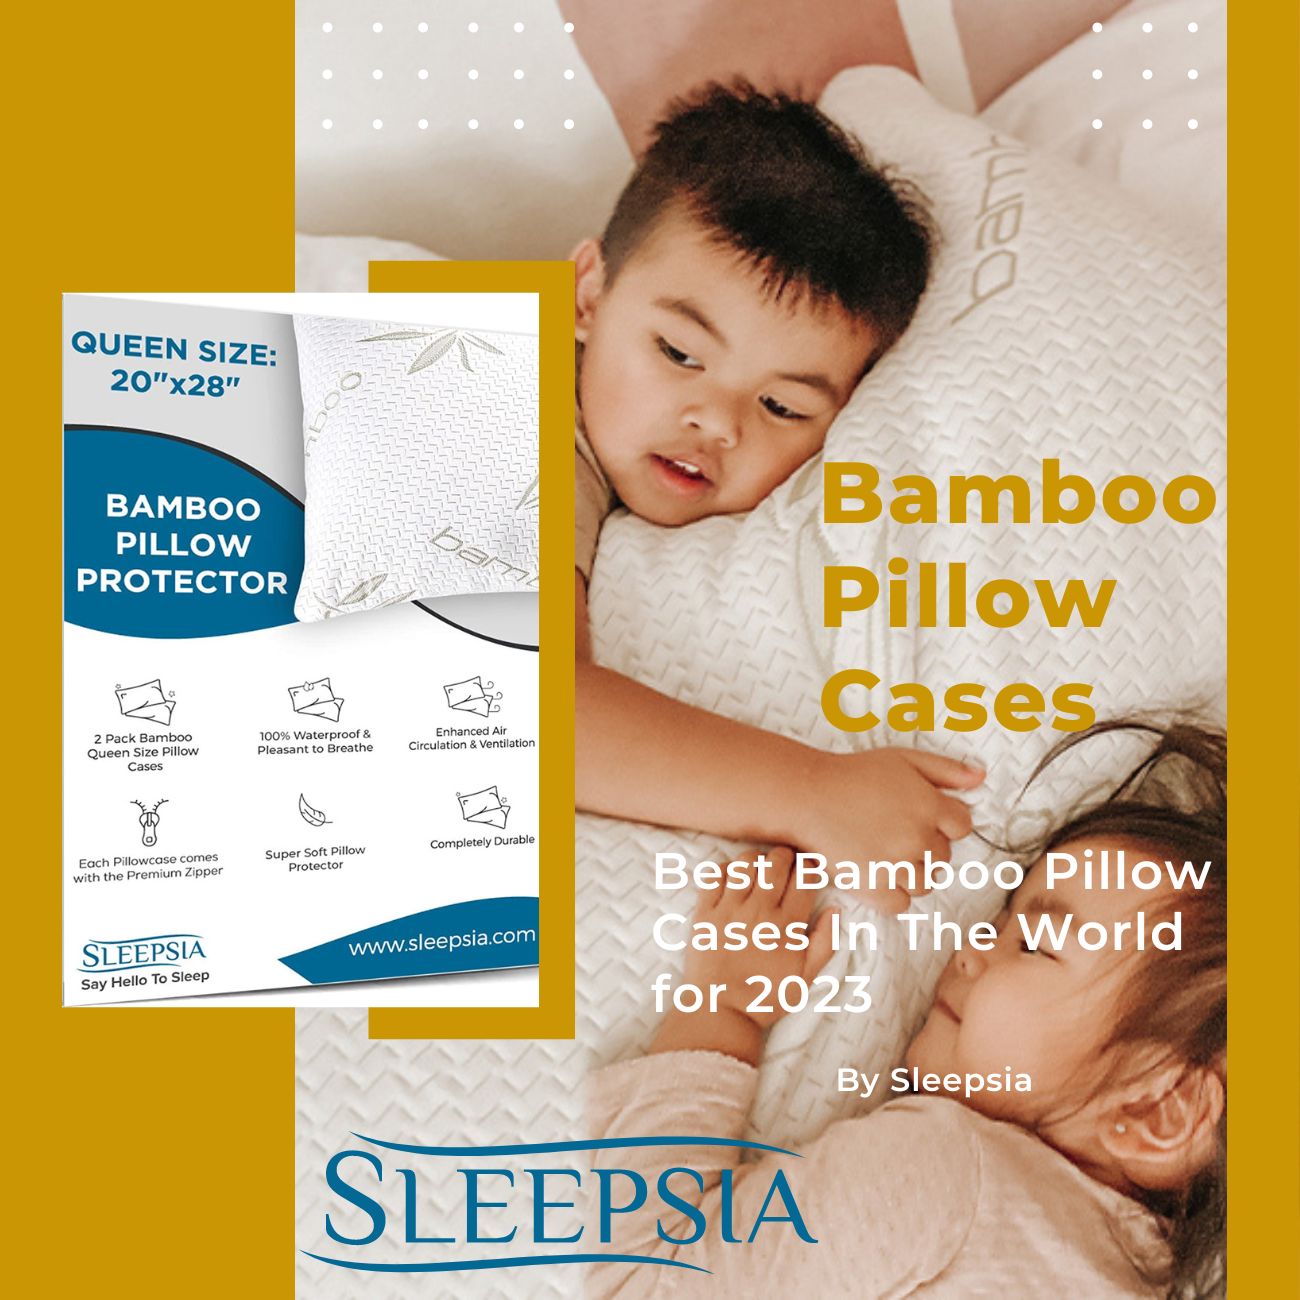 Bamboo Pillow Cases